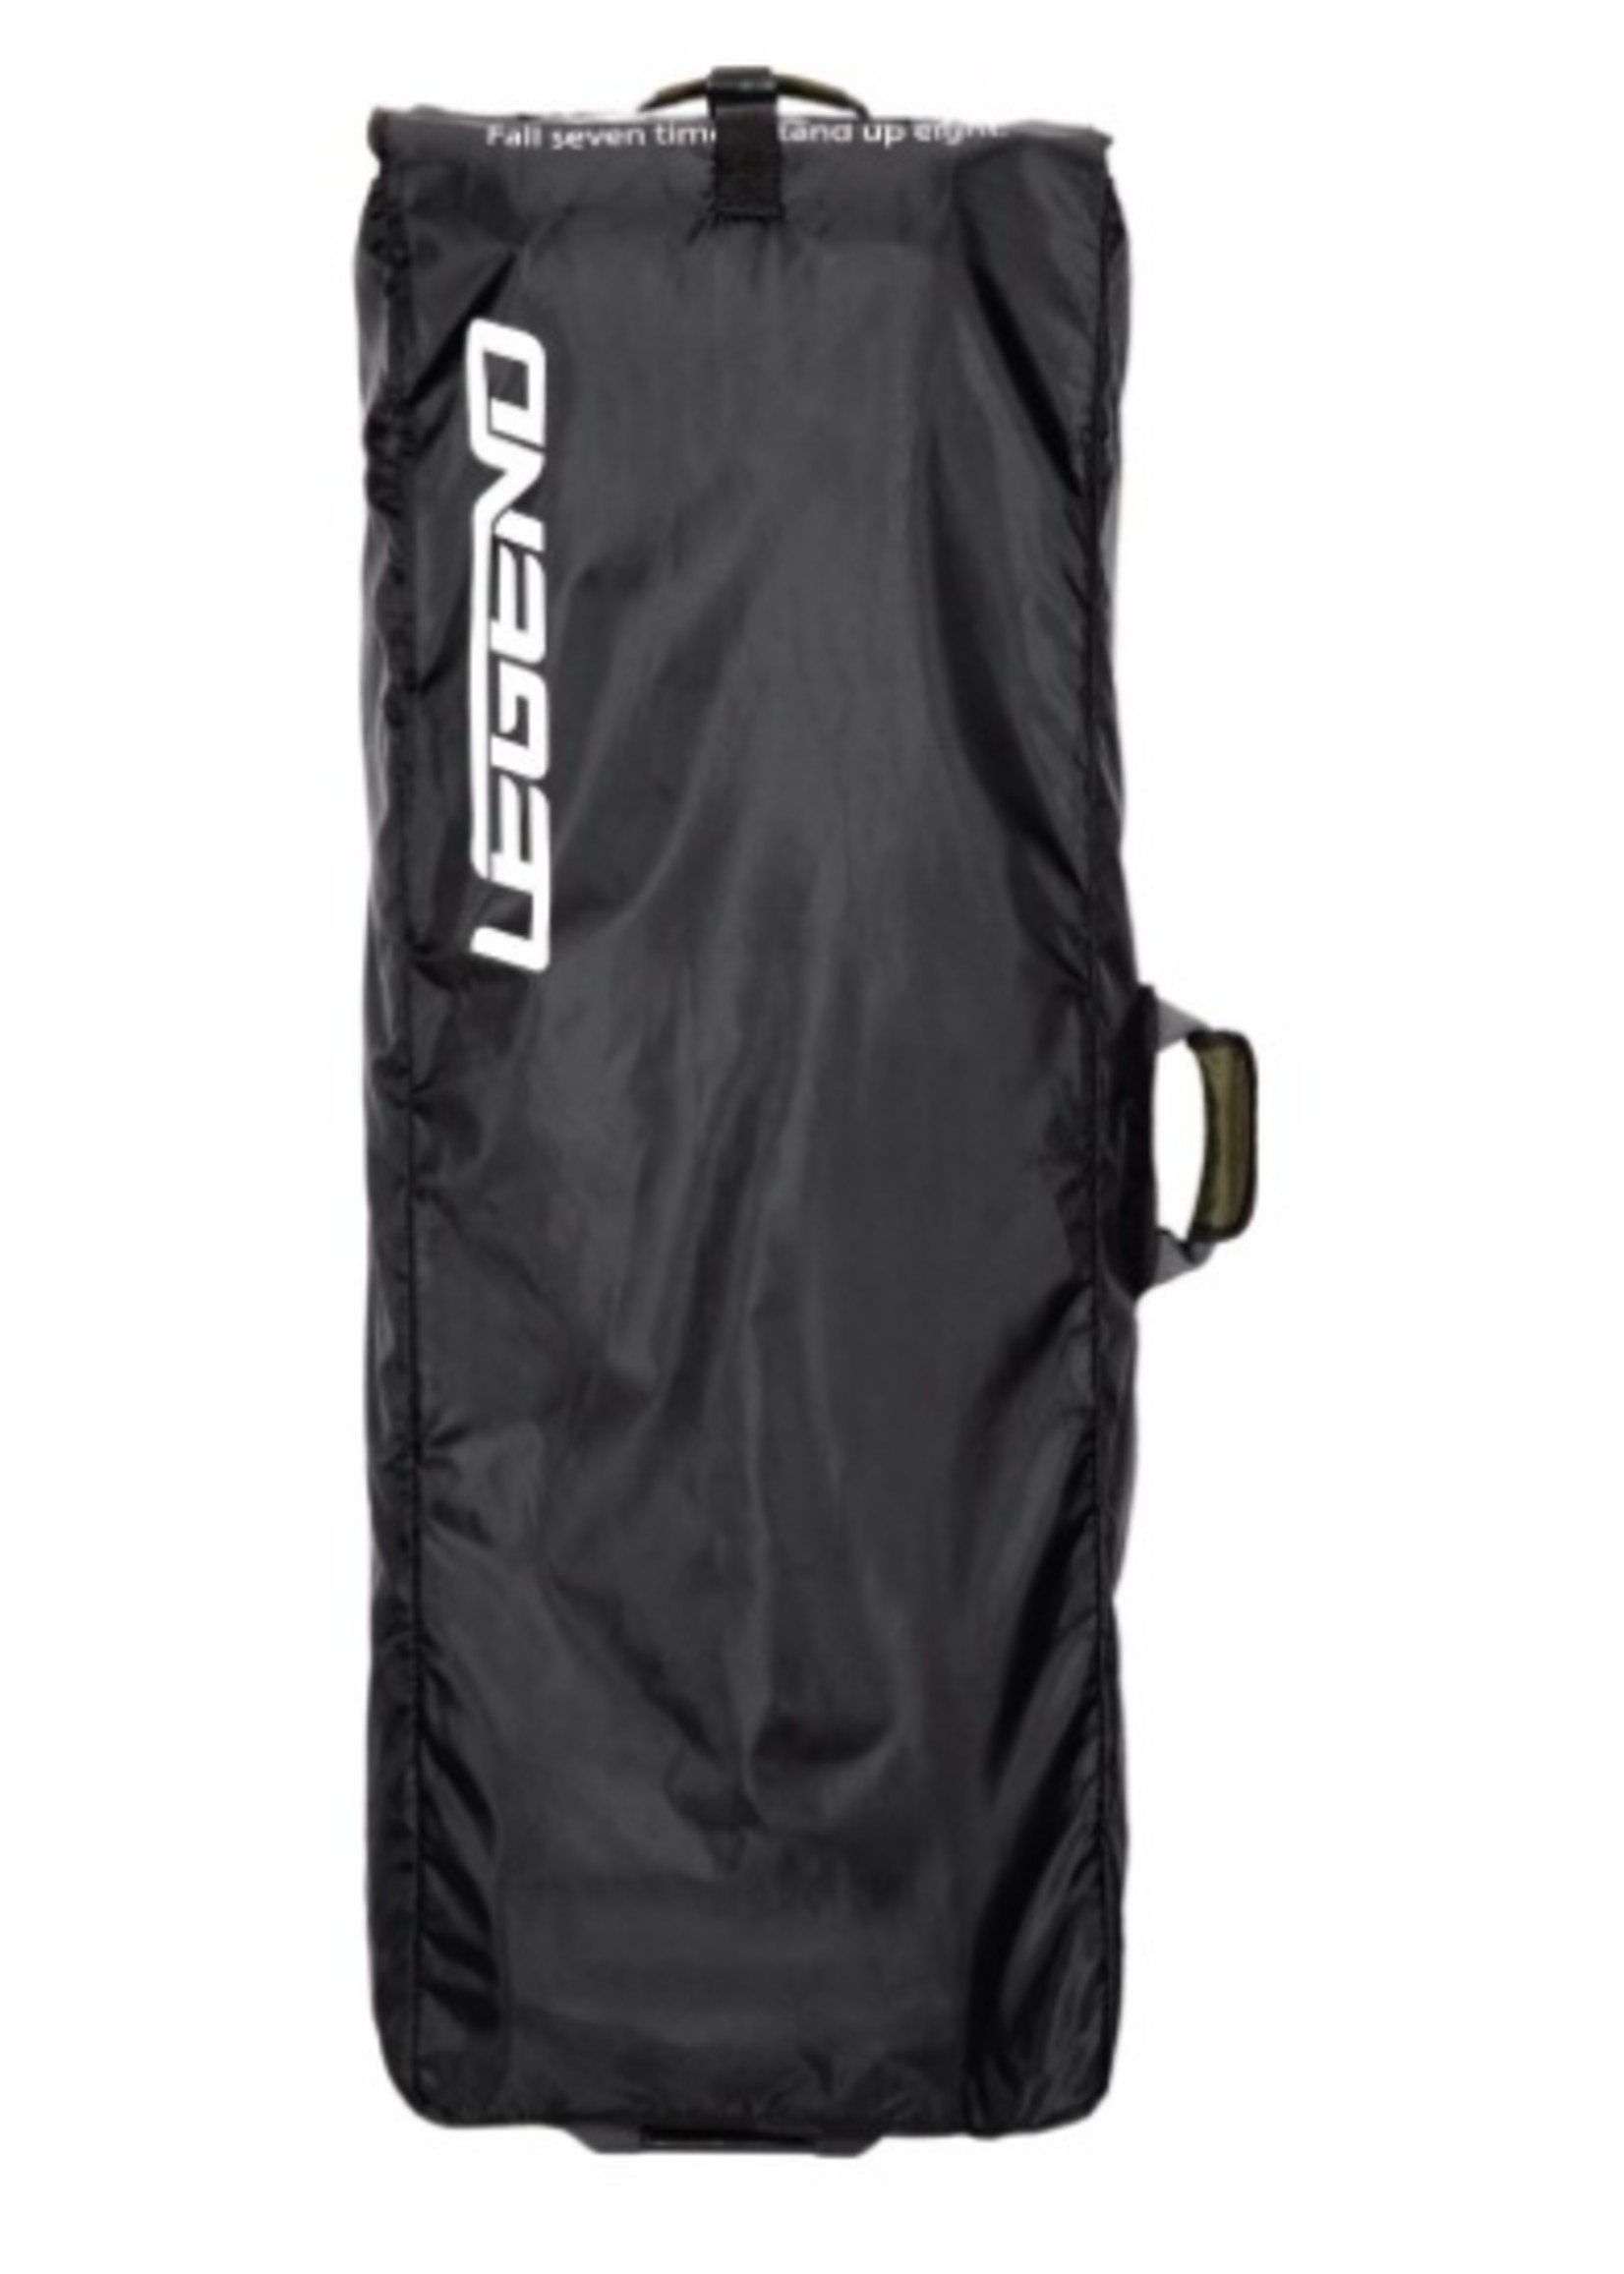 Legend Legend Archery “Everest” Trolley Case  Airline Cover